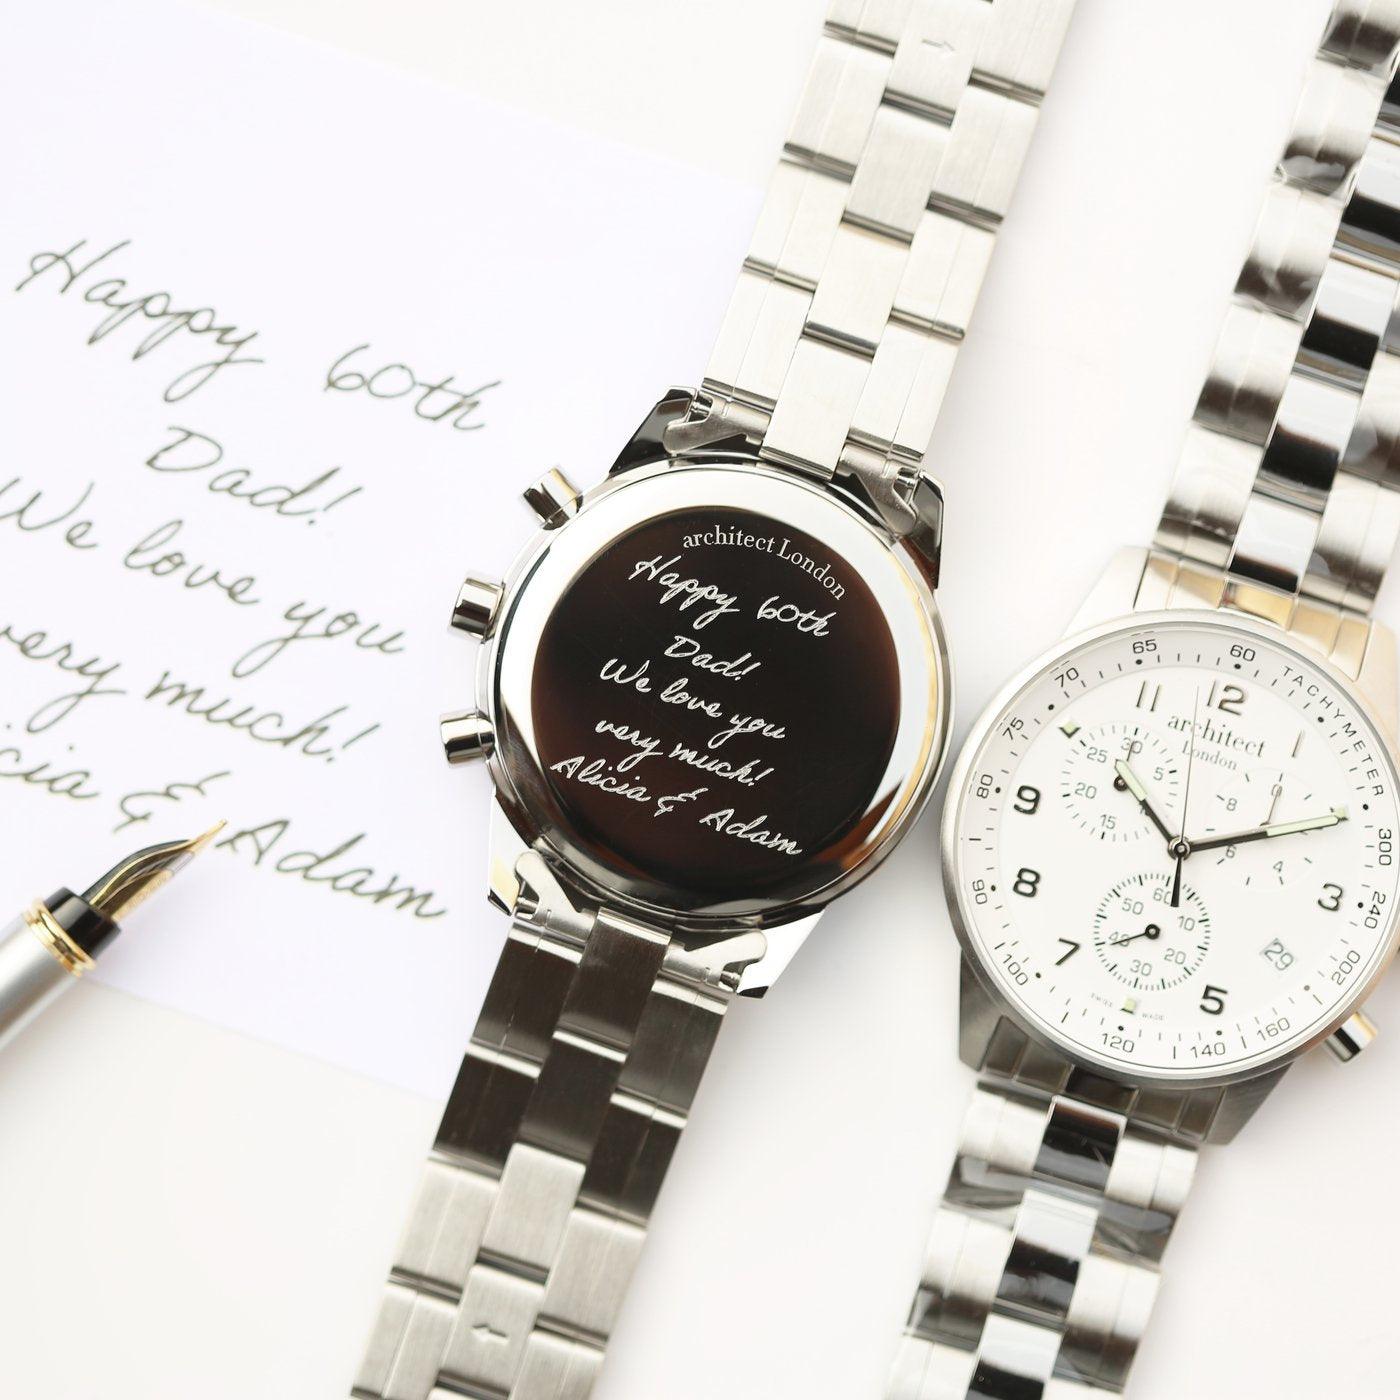 Handwriting Engraving - Men's Swiss Made Architect Endeavour - Shop Personalised Gifts